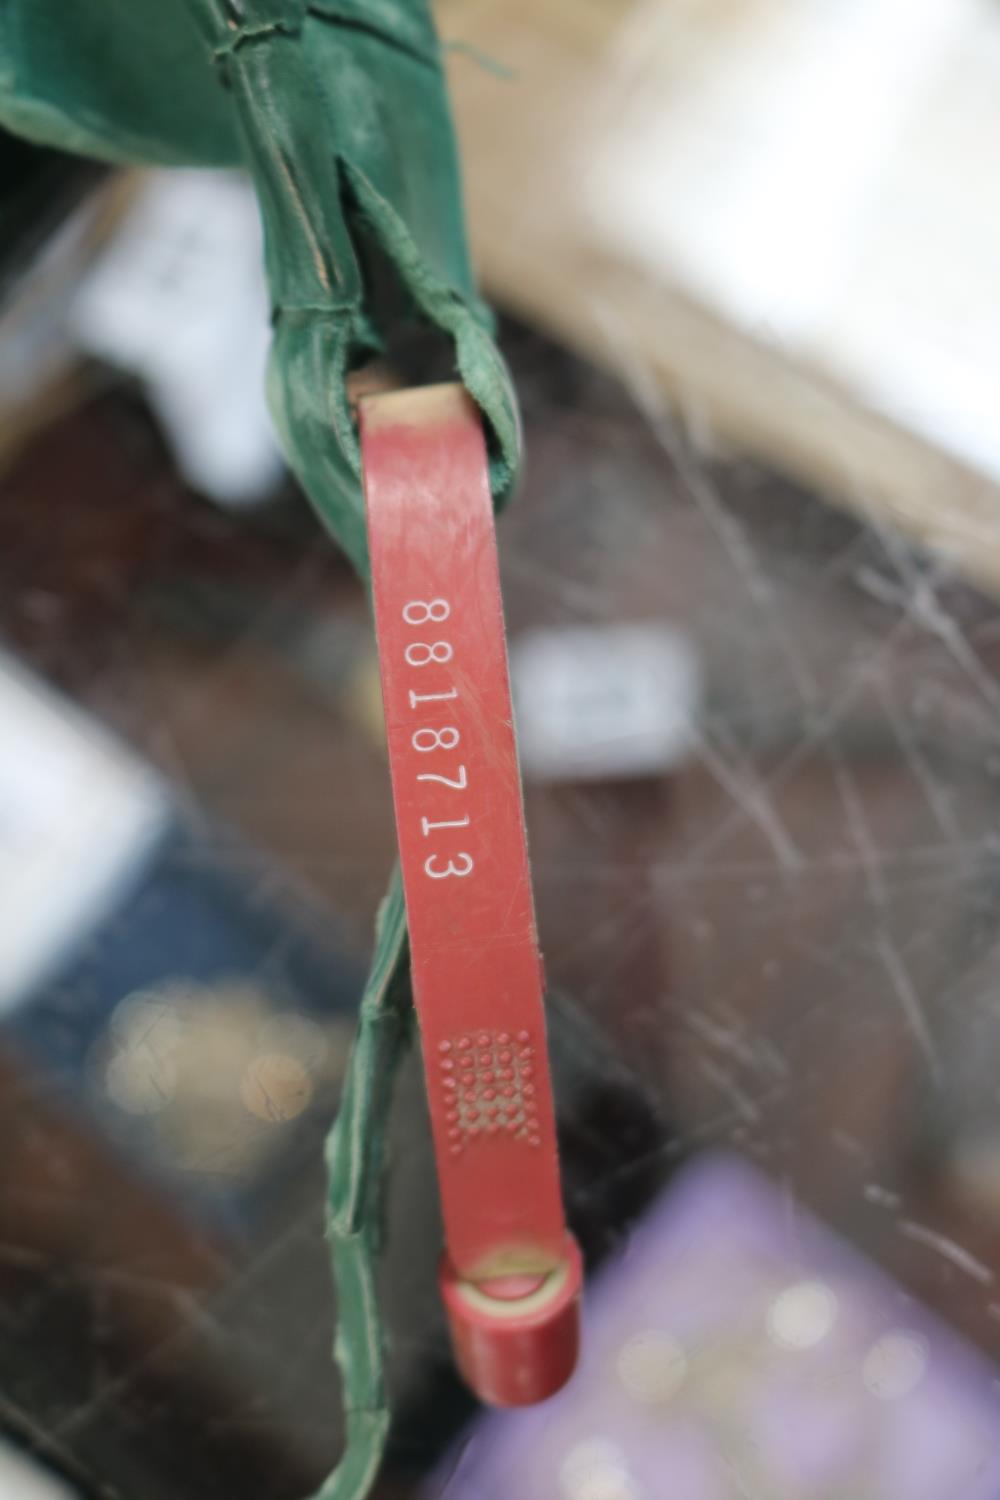 Green Leather Crocodile Skin with import tag - Image 2 of 2